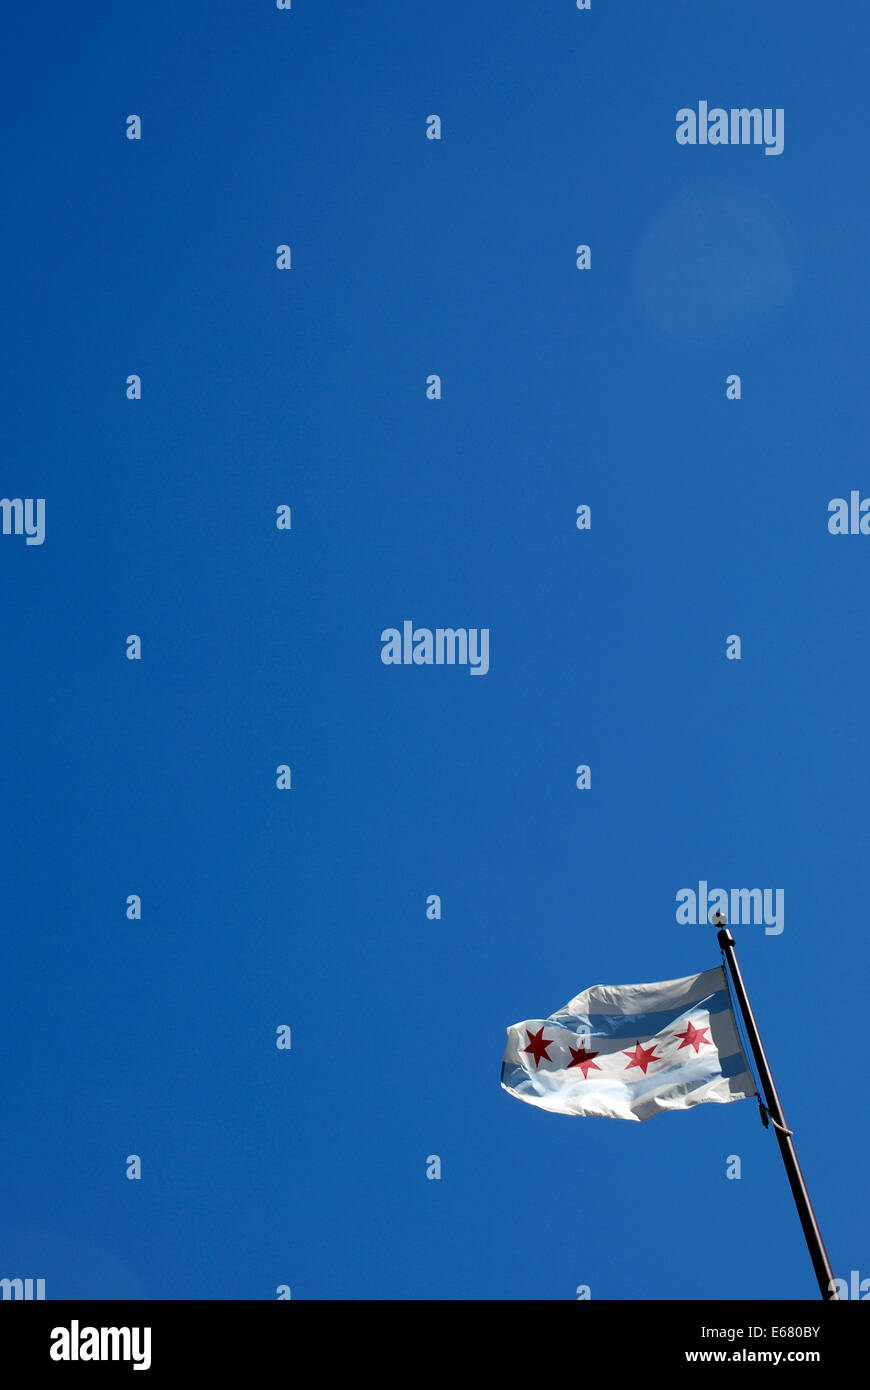 The municipal flag of Chicago on Michigan Avenue Bridge blowing in the wind on a flag pole in Chicago against clear blue sky. Stock Photo